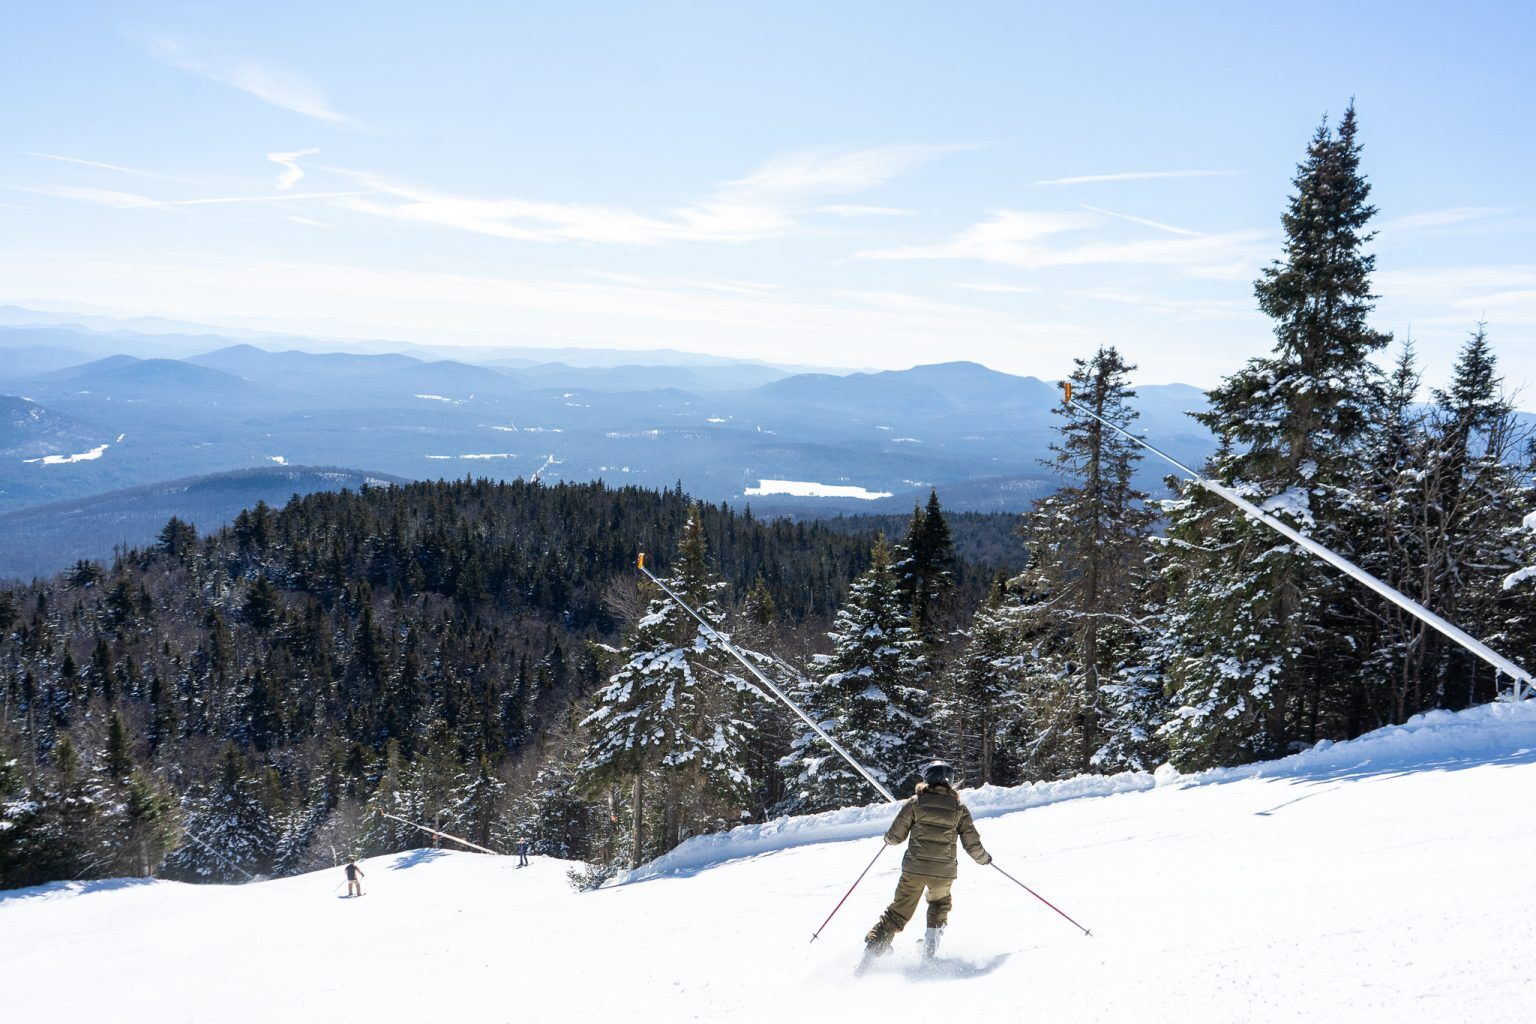 Best Ski Resorts in New York State. Places for winter recreation and activities in the Empire State